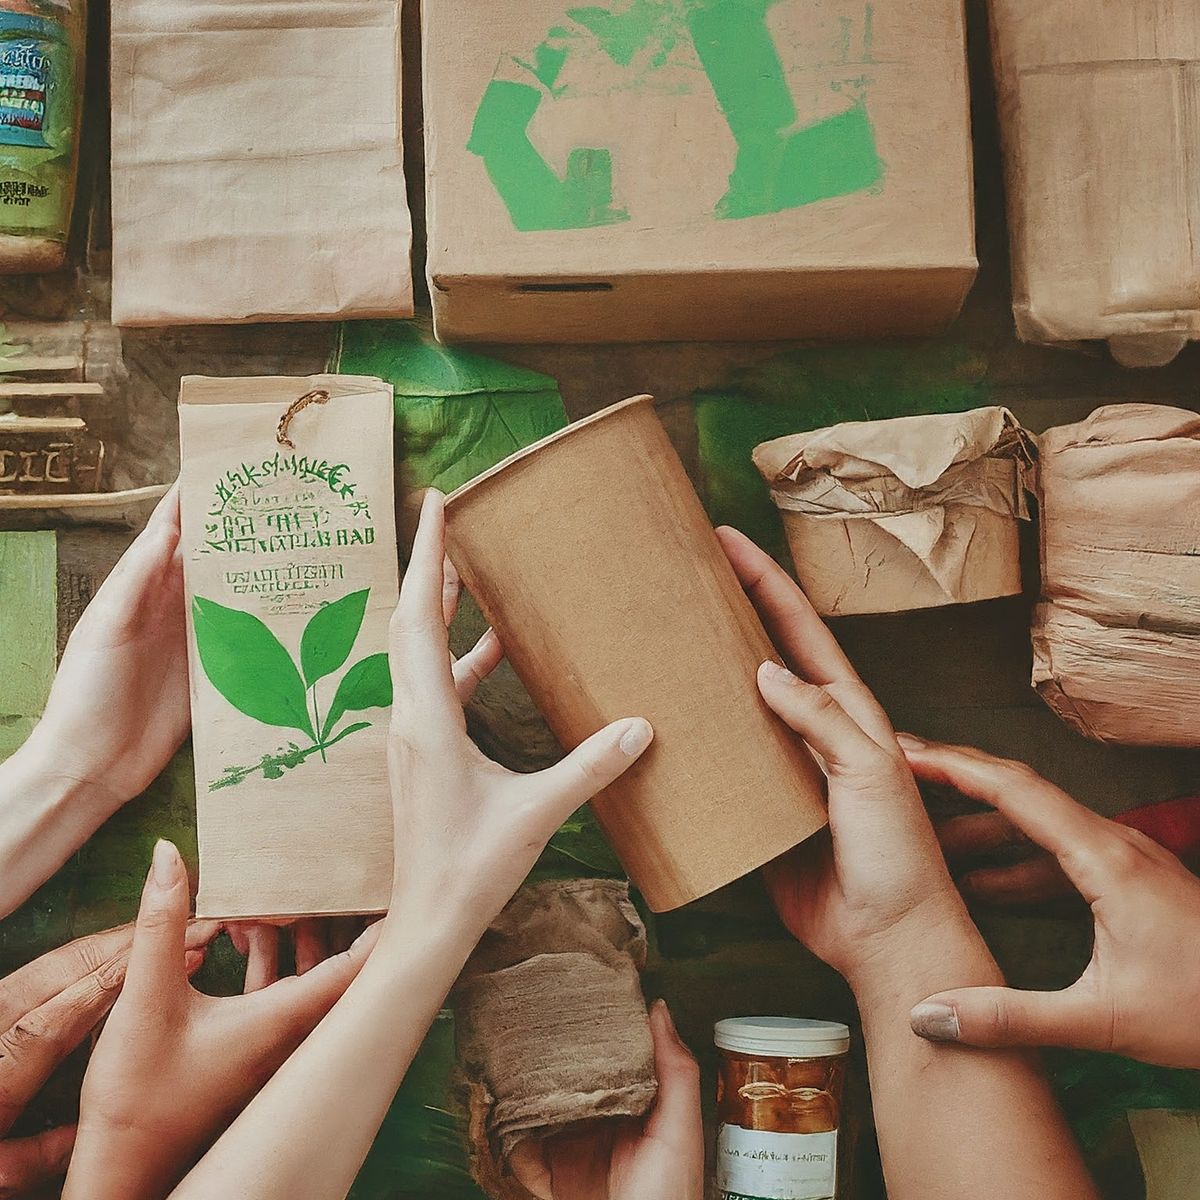 Consumer Trends: How Demand for Sustainable Packaging is Shaping the Market